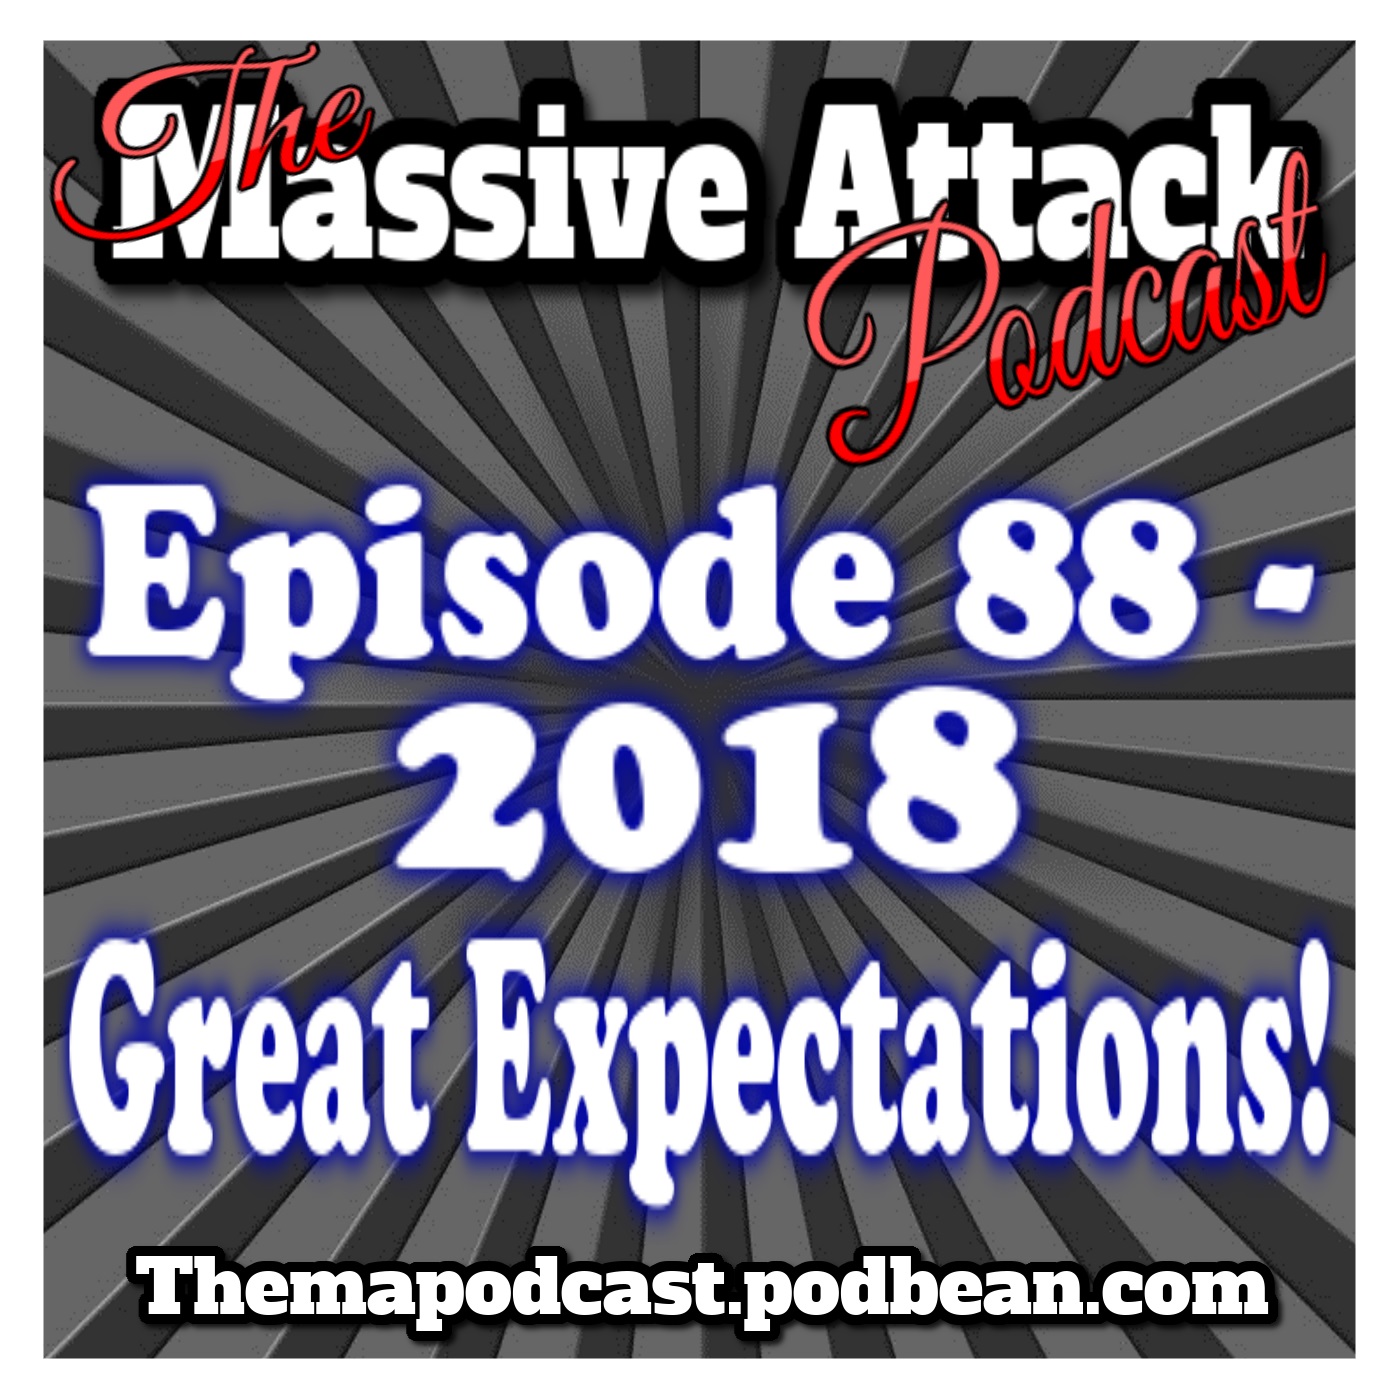 Episode 88 - 2018 Great Expectations!